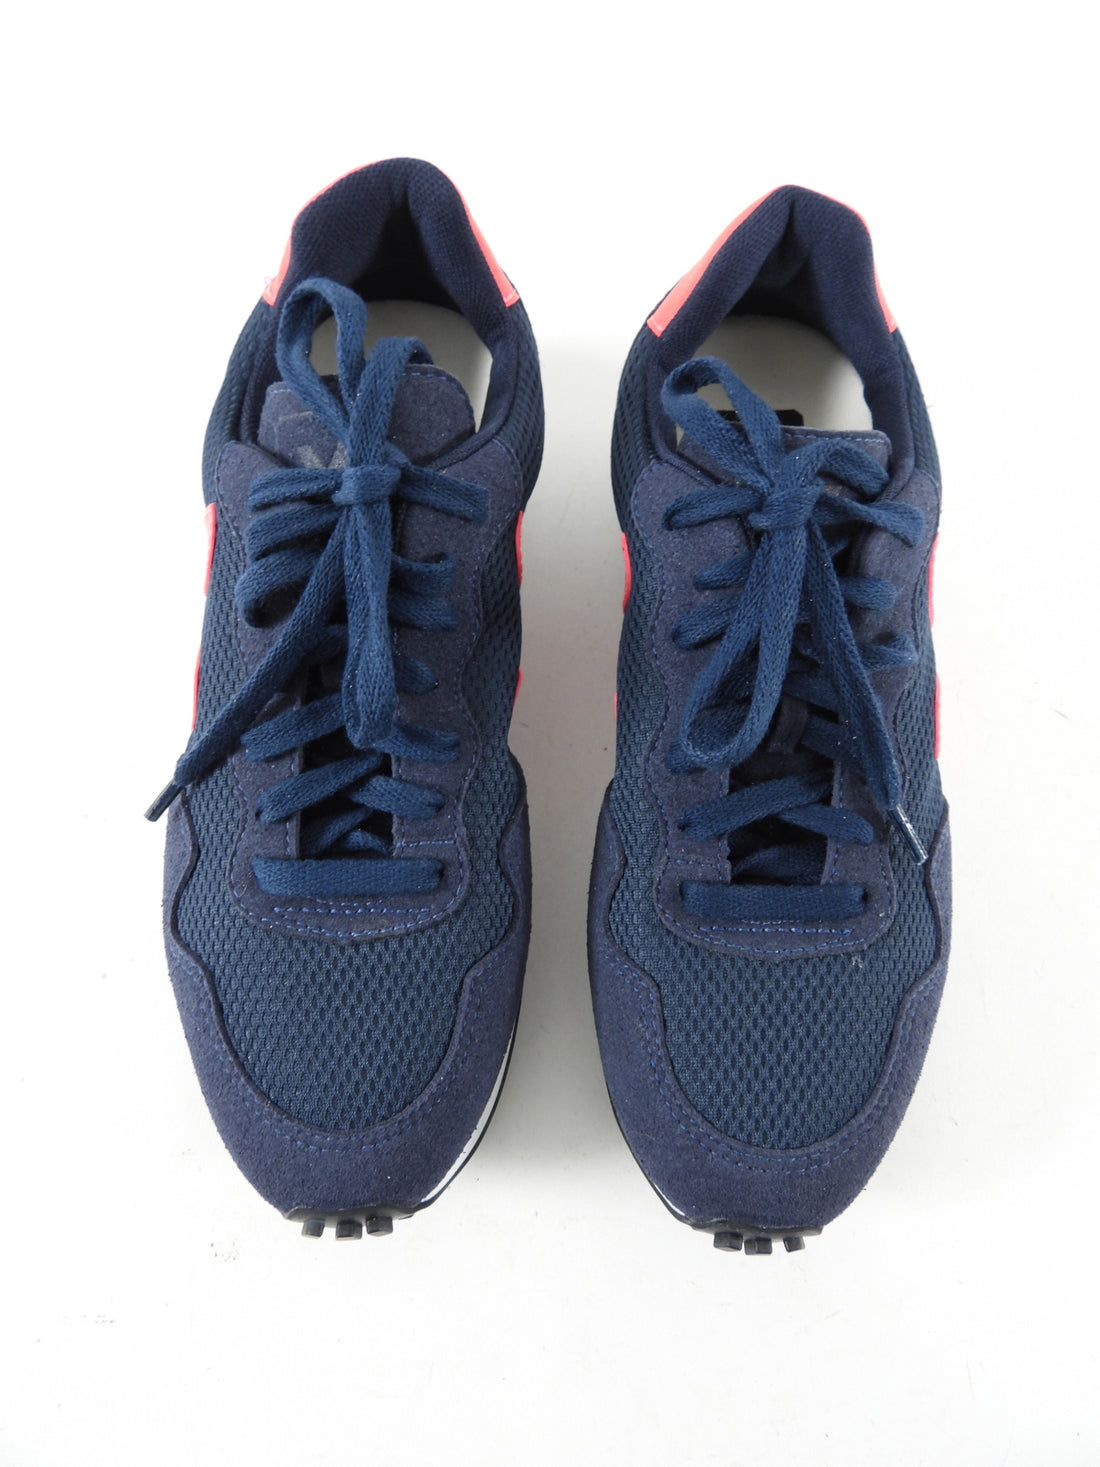 Veja Sneakers - navy and hot pink - USA 7